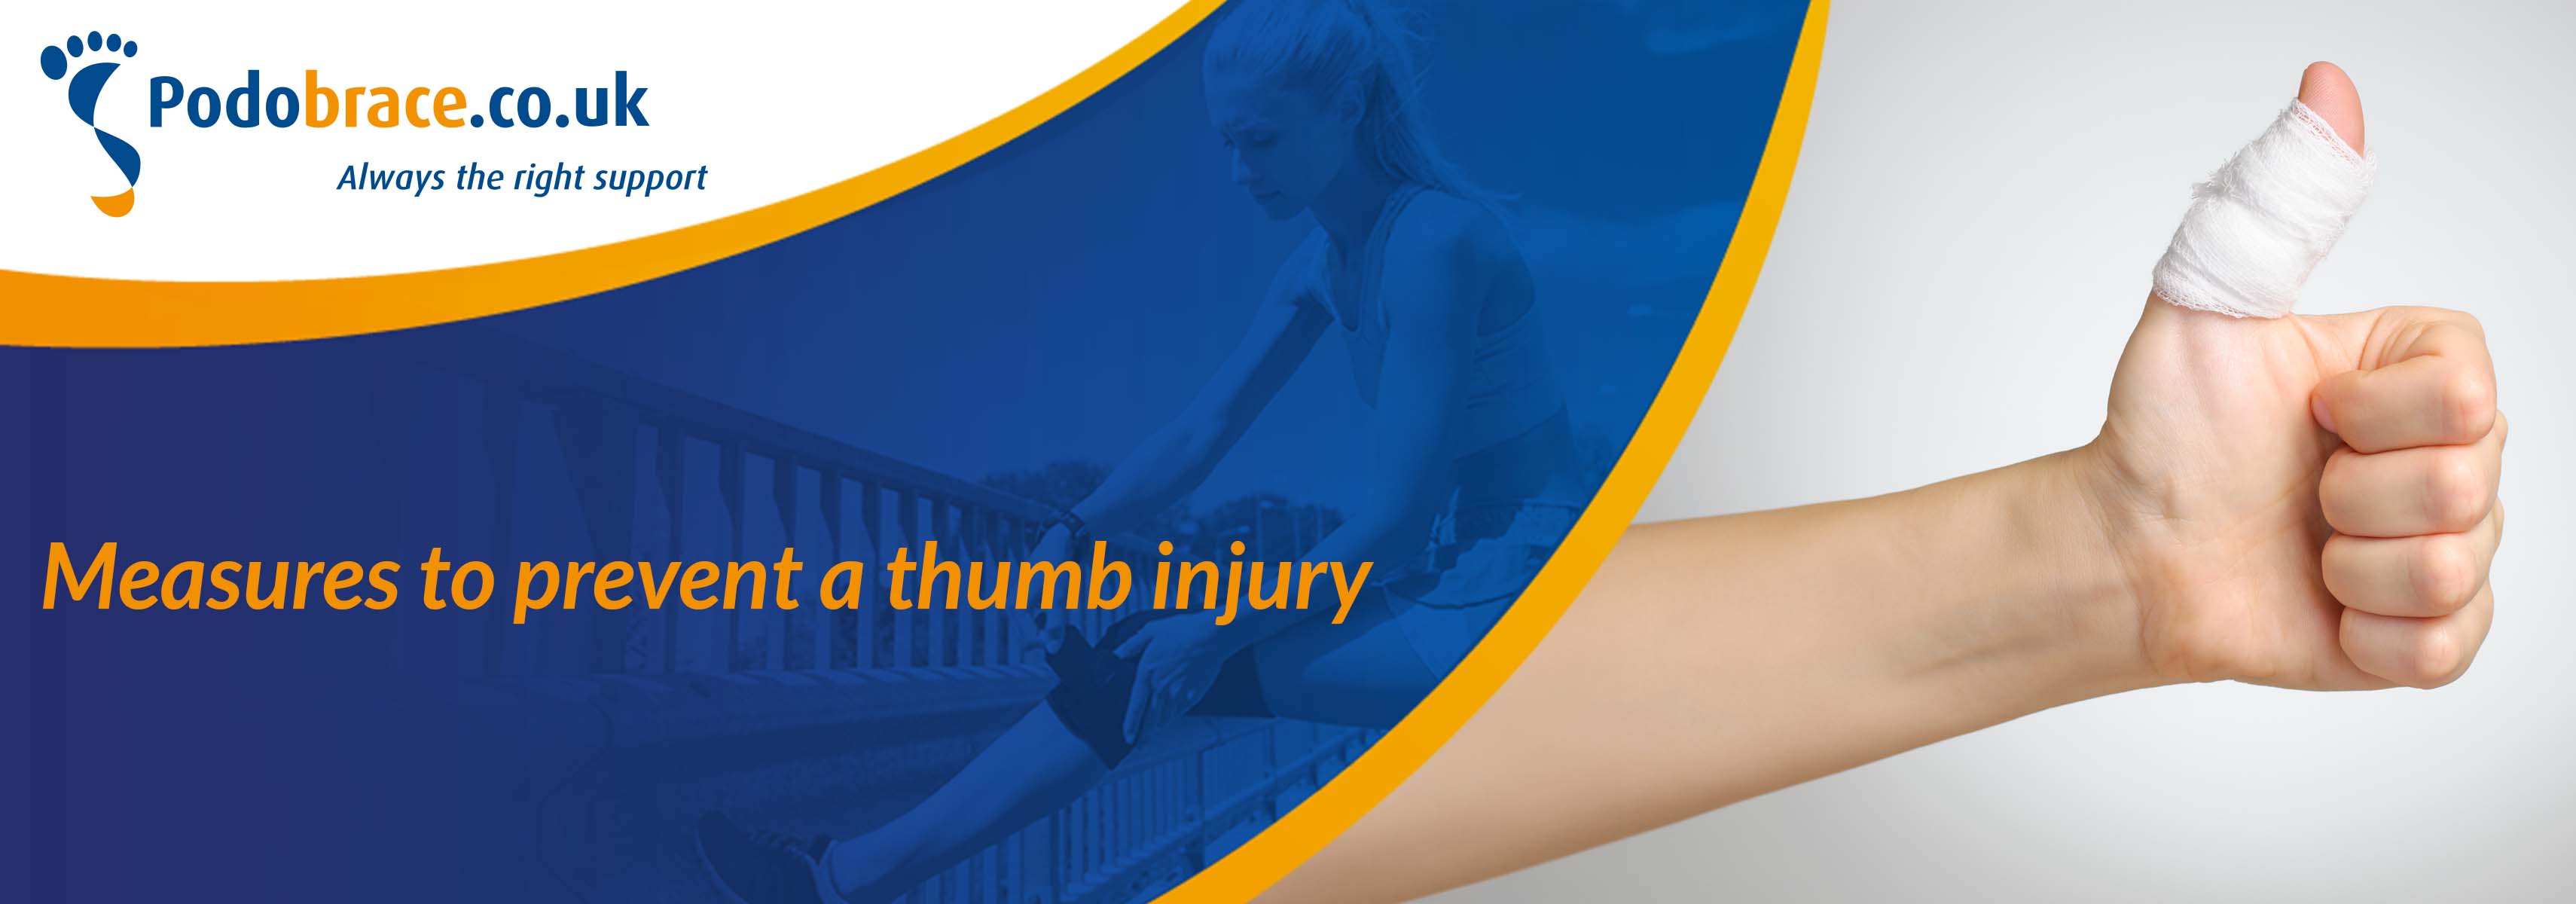 measures to prevent a thumb injury